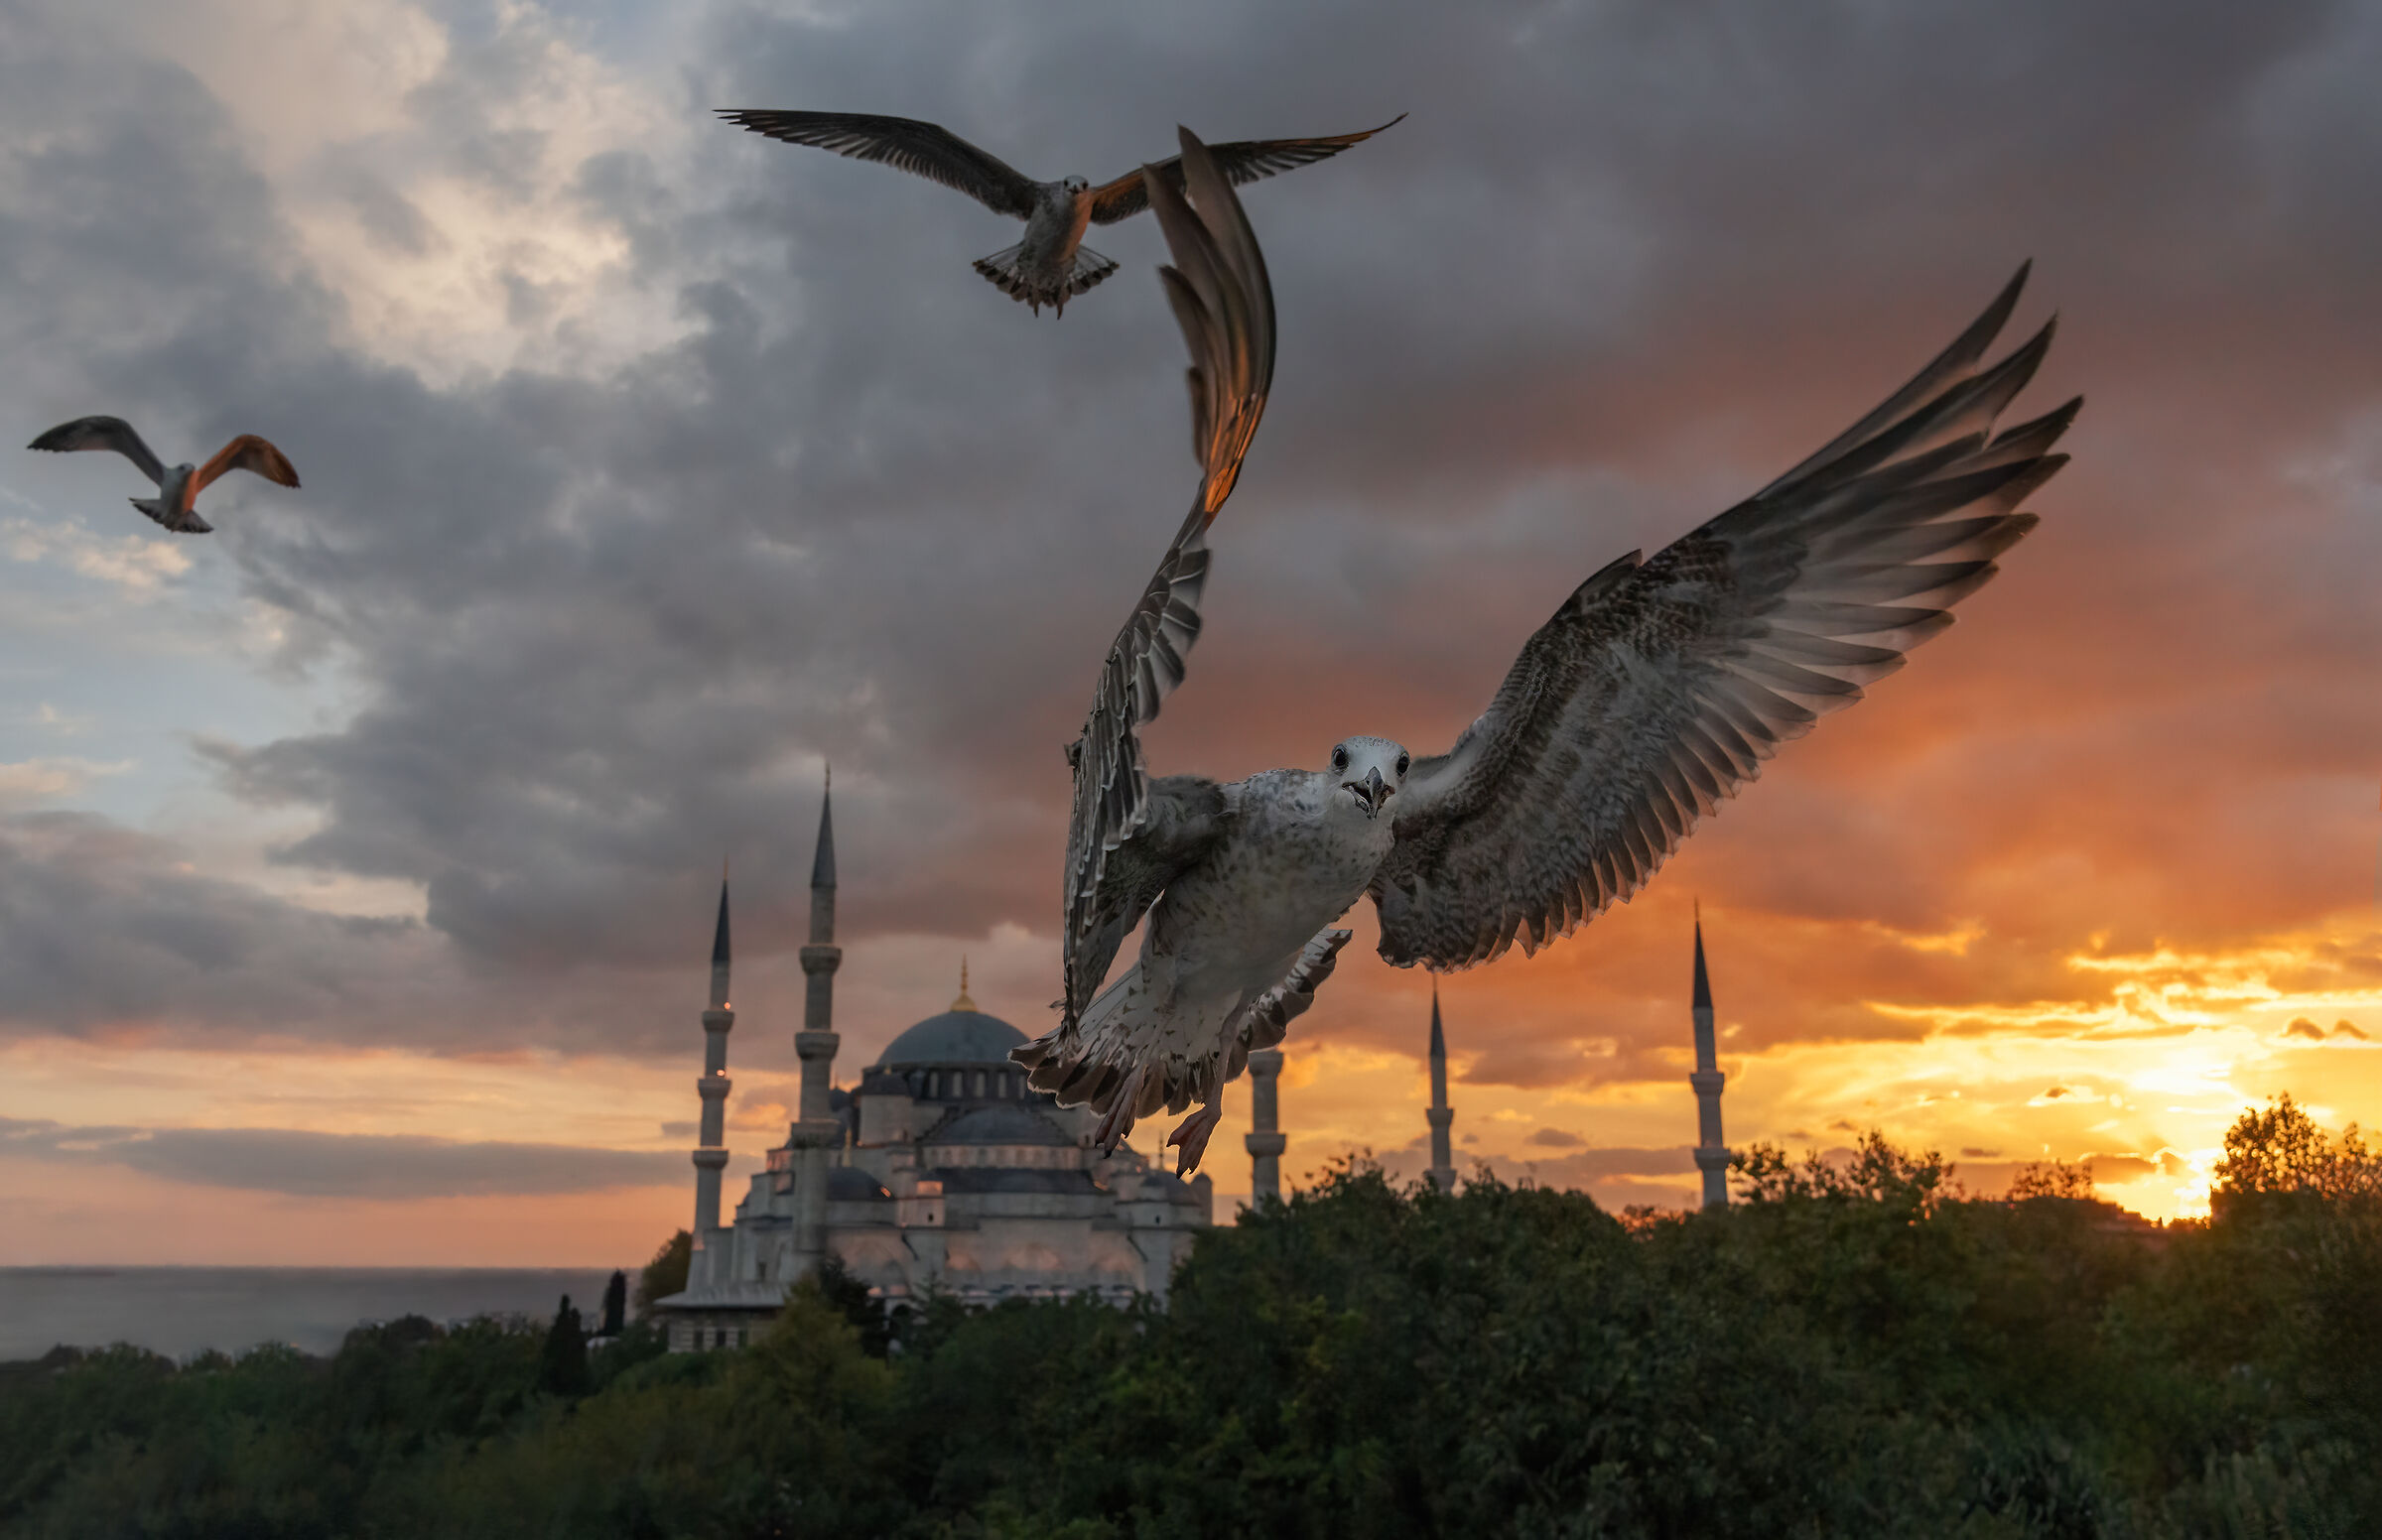 The Blue Mosque and the Seagulls...